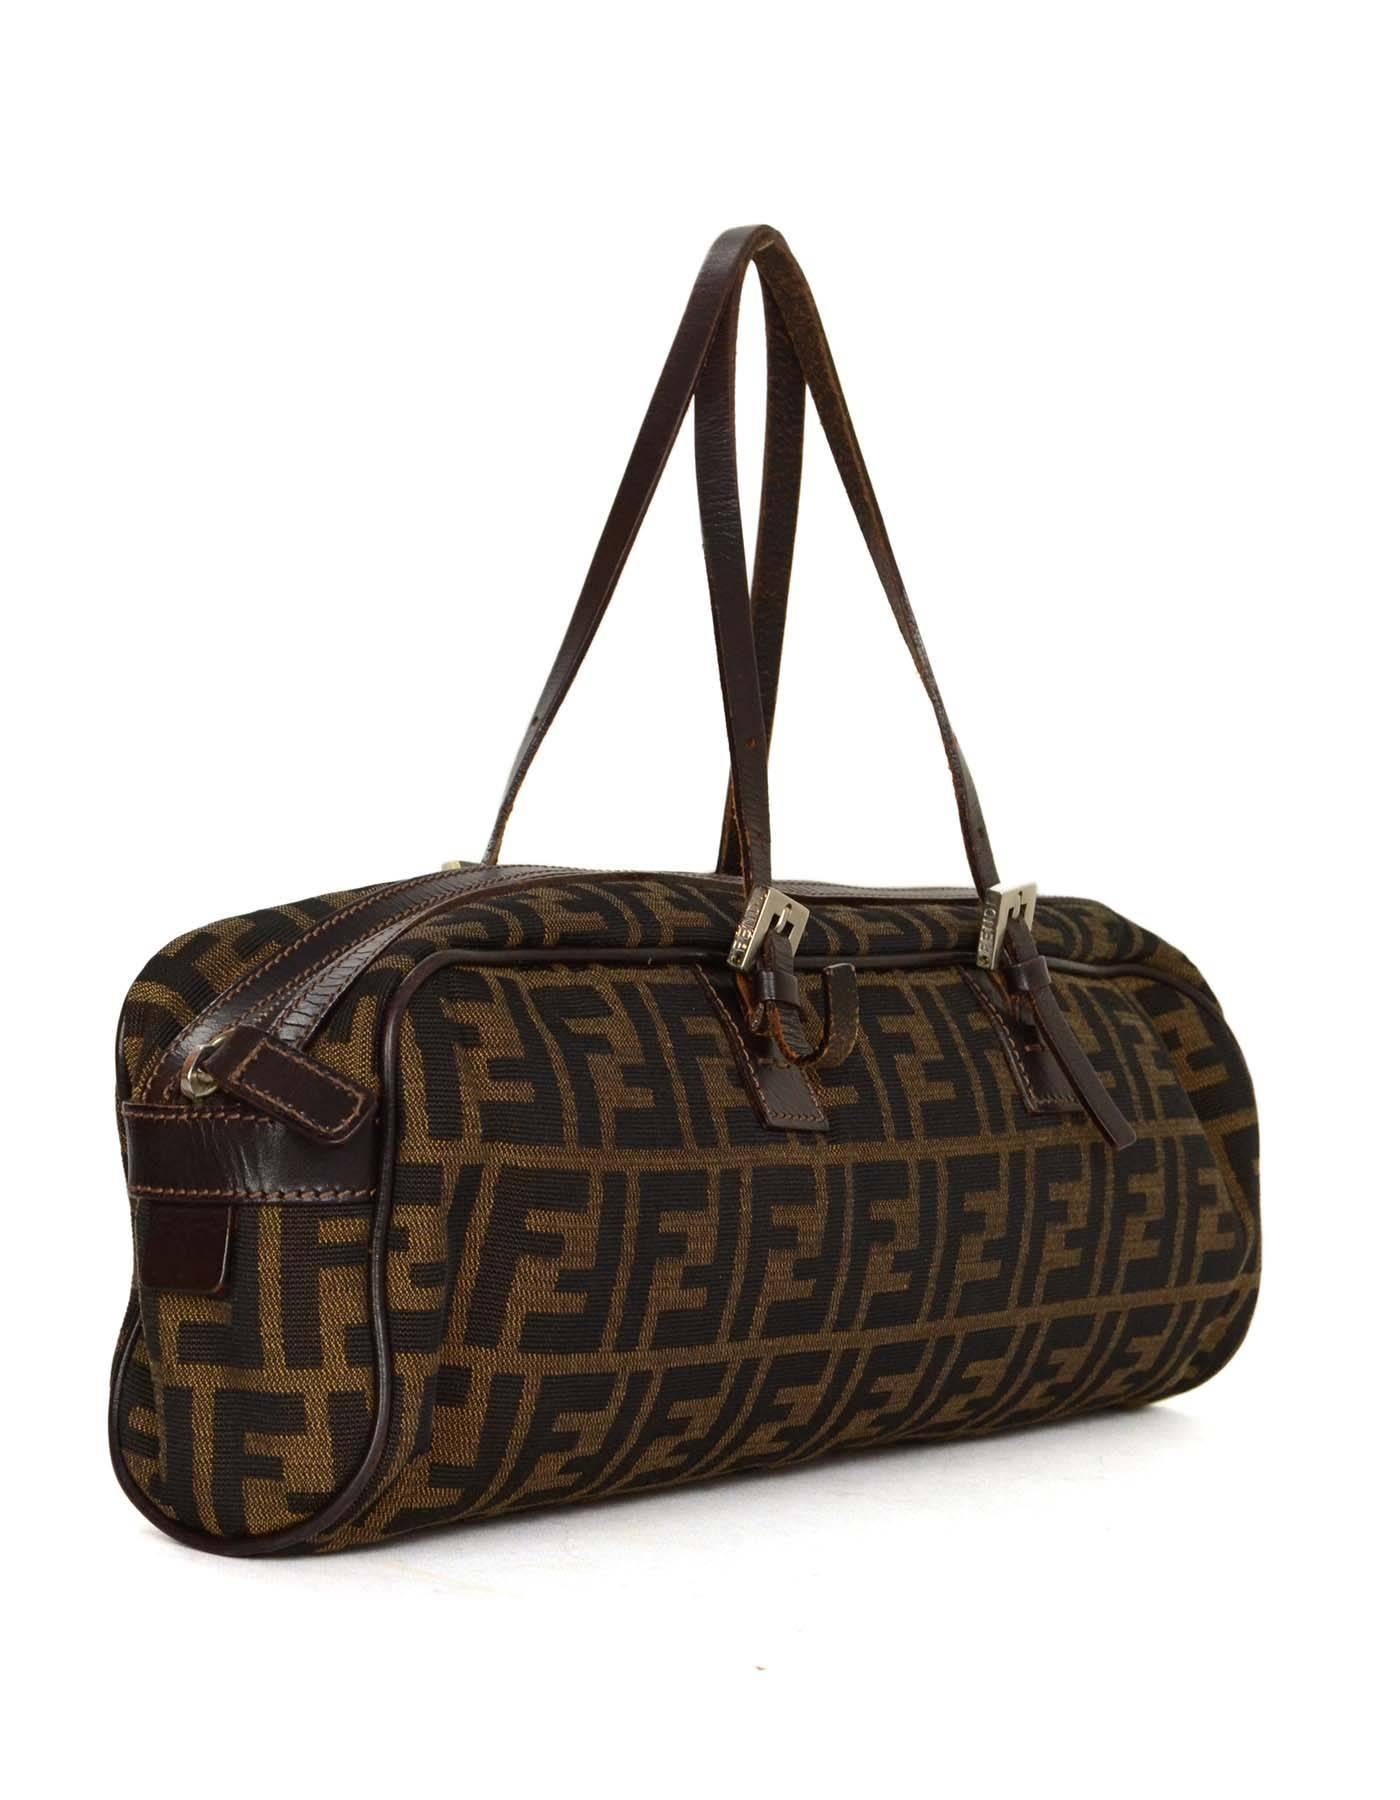 Fendi Zucca Print Canvas Baguette 
Features adjustable shoulder straps
Made In: Italy
Color: Brown and black
Hardware: Silvertone
Materials: Canvas and leather
Lining: Brown nylon
Closure/Opening: Zip across top
Exterior Pockets: